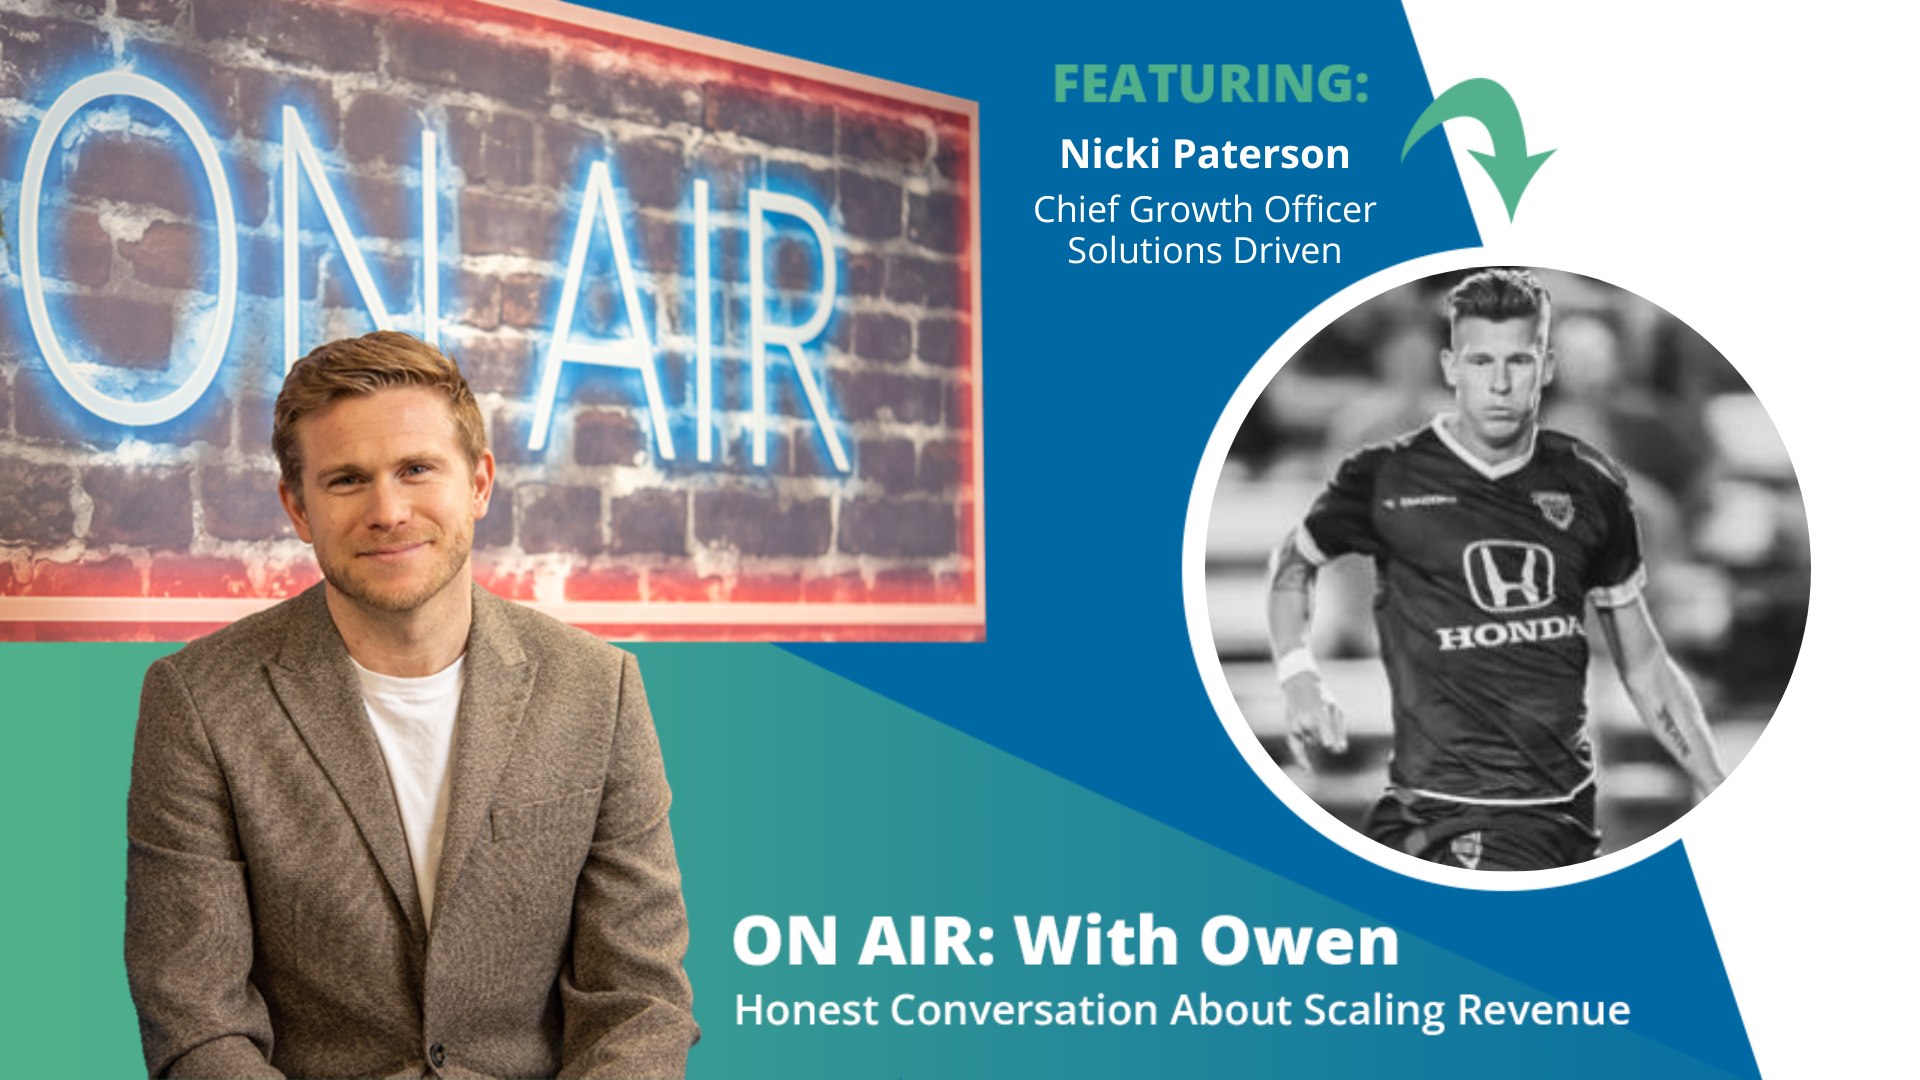 ON AIR: With Owen Episode 65 Featuring Nicki Paterson – Chief Growth Officer of Solutions Driven